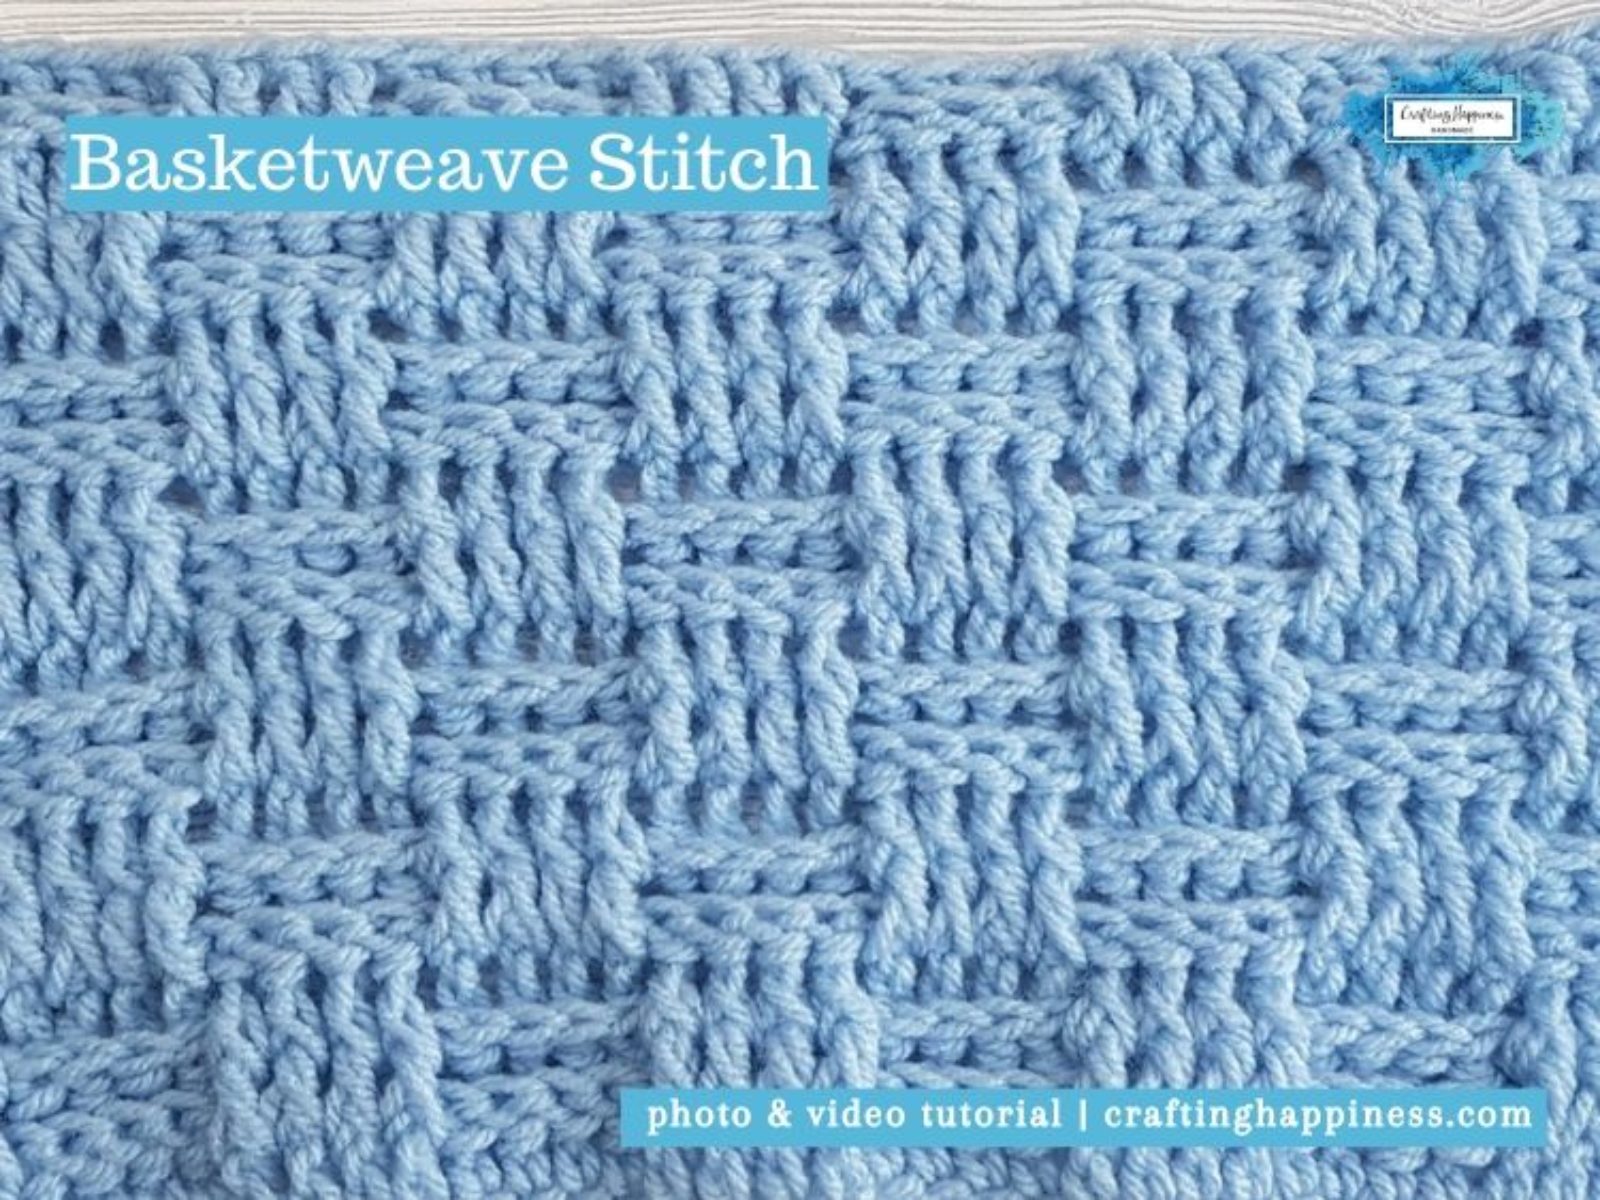 Basketweave Stitch by Crafting Happiness FACEBOOK POSTER